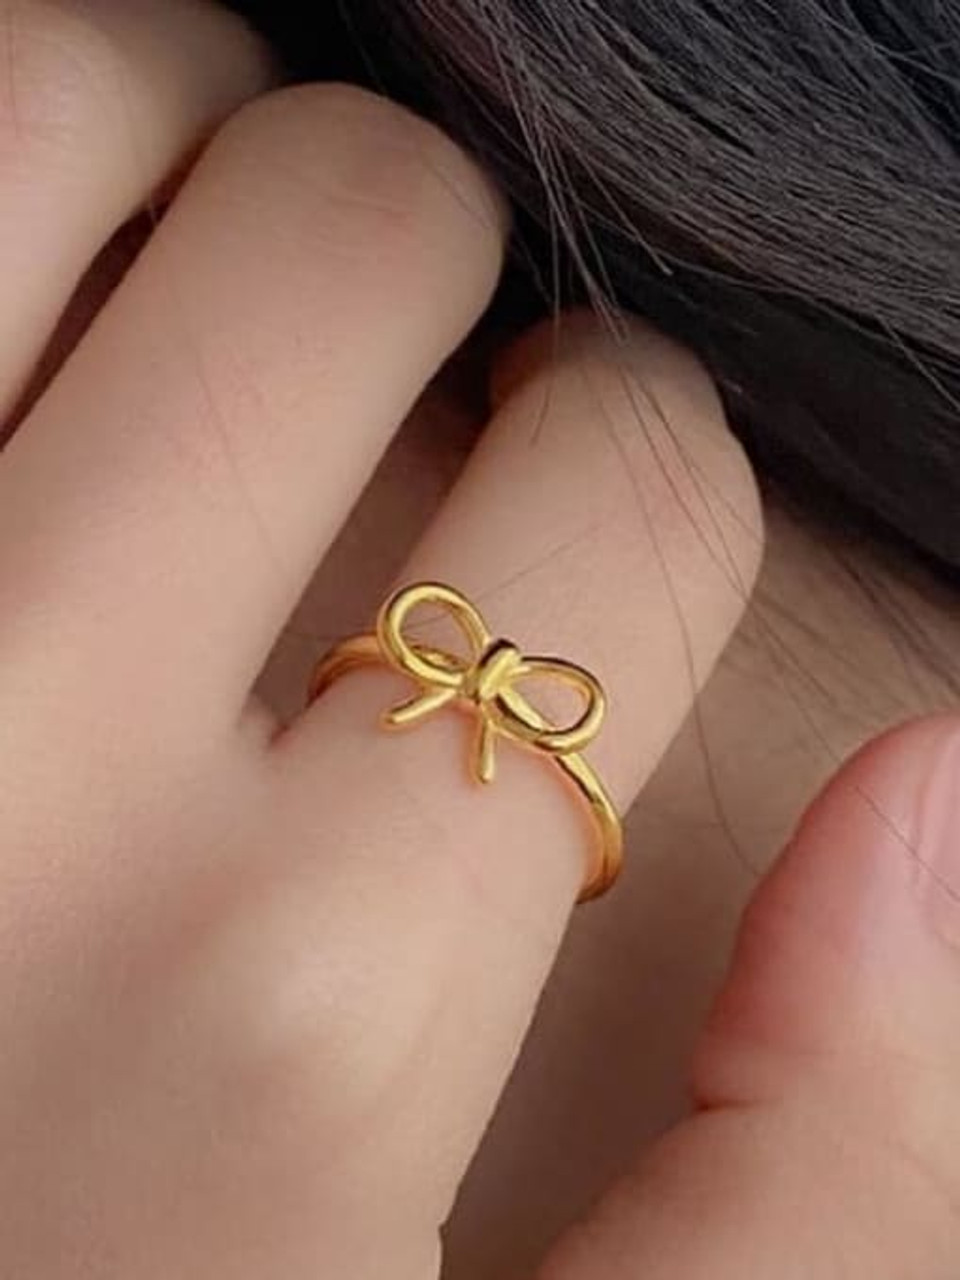 Latest Gold Ring Design For Women//Ladies Gold Ring Design//Gold Ring  Design For Girls 2020 | Ladies gold rings, Gold ring designs, Gold rings  jewelry